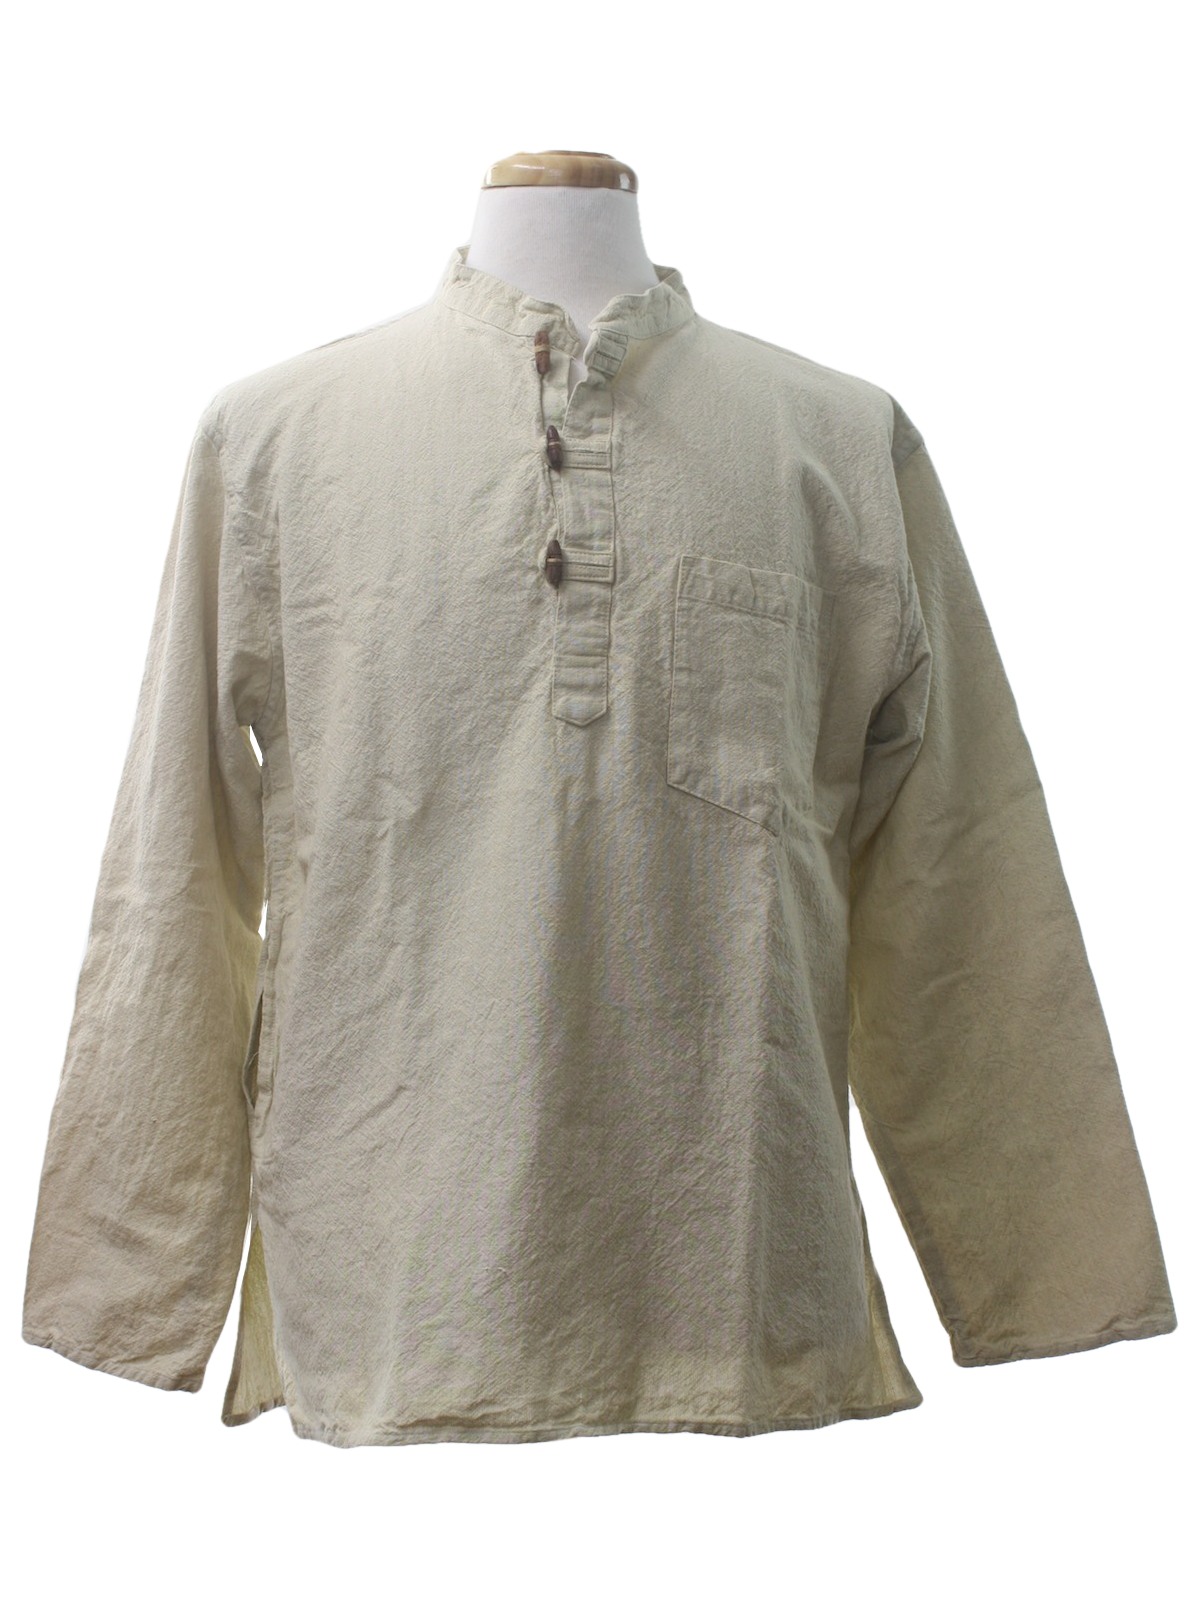 90's Vintage Hippie Shirt: 90s -Made in Nepal- Mens tan